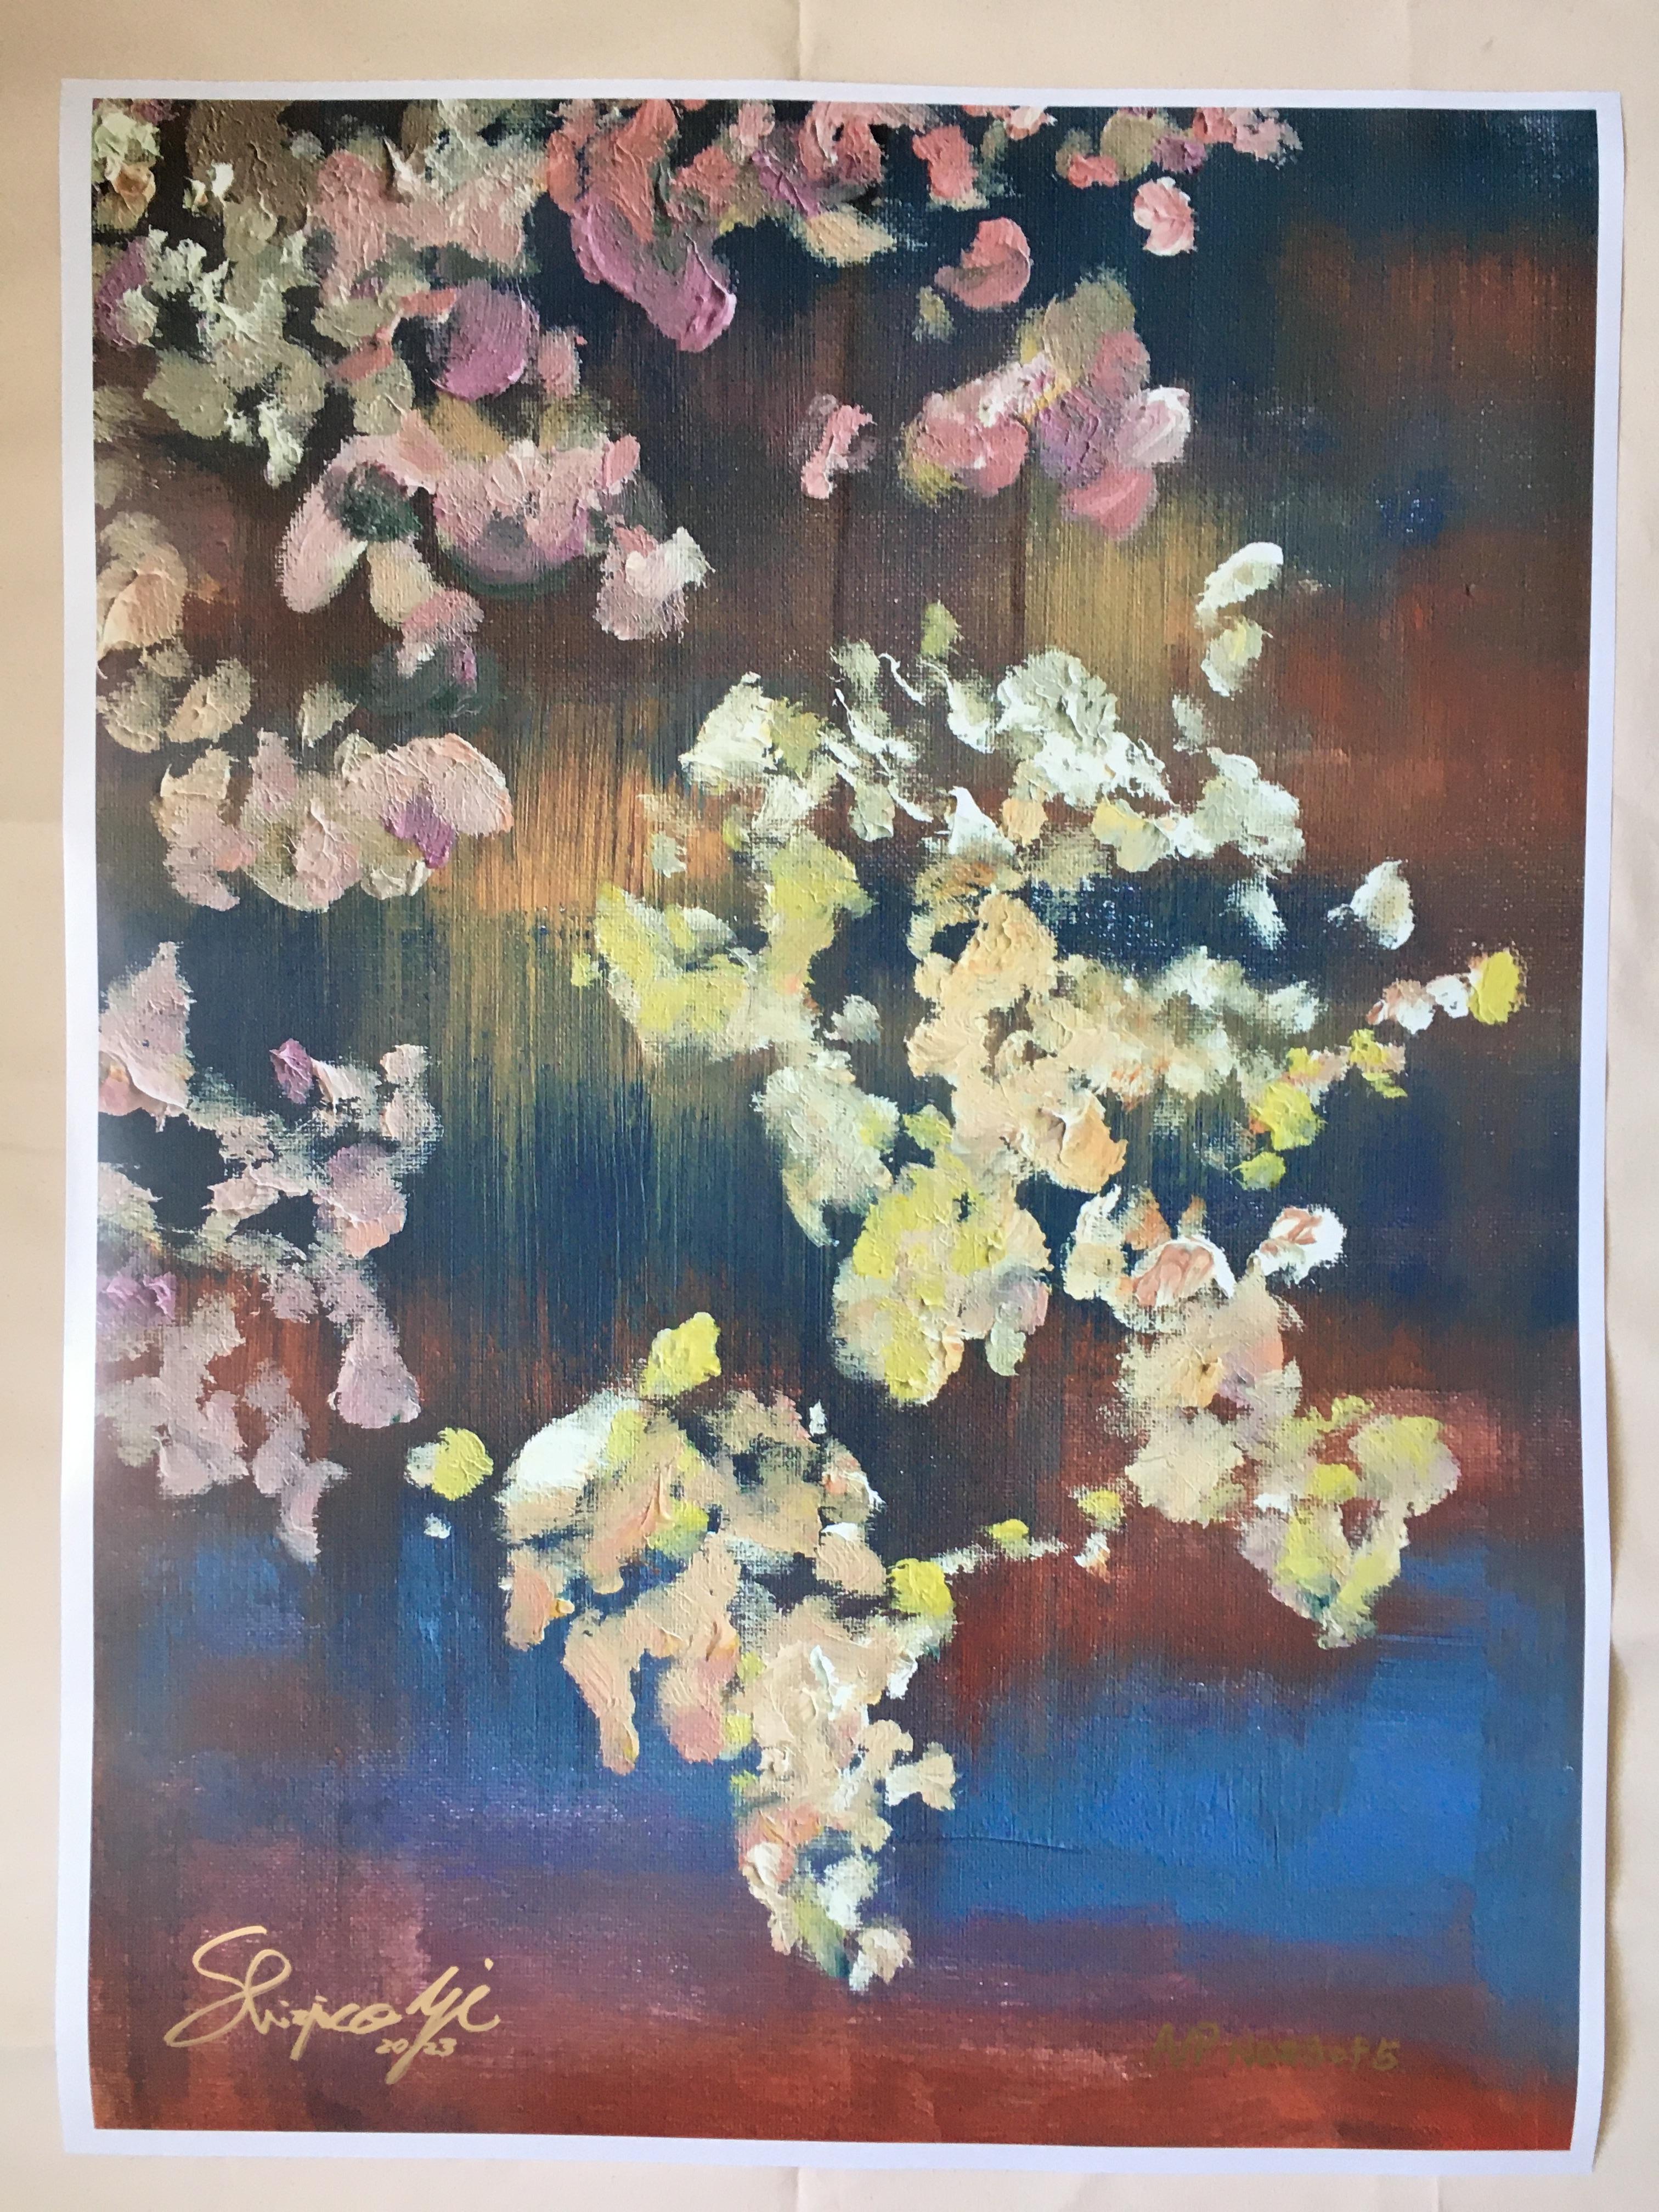 A rare chance to collect the last Proof Edition ( 5 only) by Shizico Yi ; this large size painting would bring impact to your space! ( it's an rare extra large size and the Last proof available, 101 x 76 CM )

-The painting captures the major spring